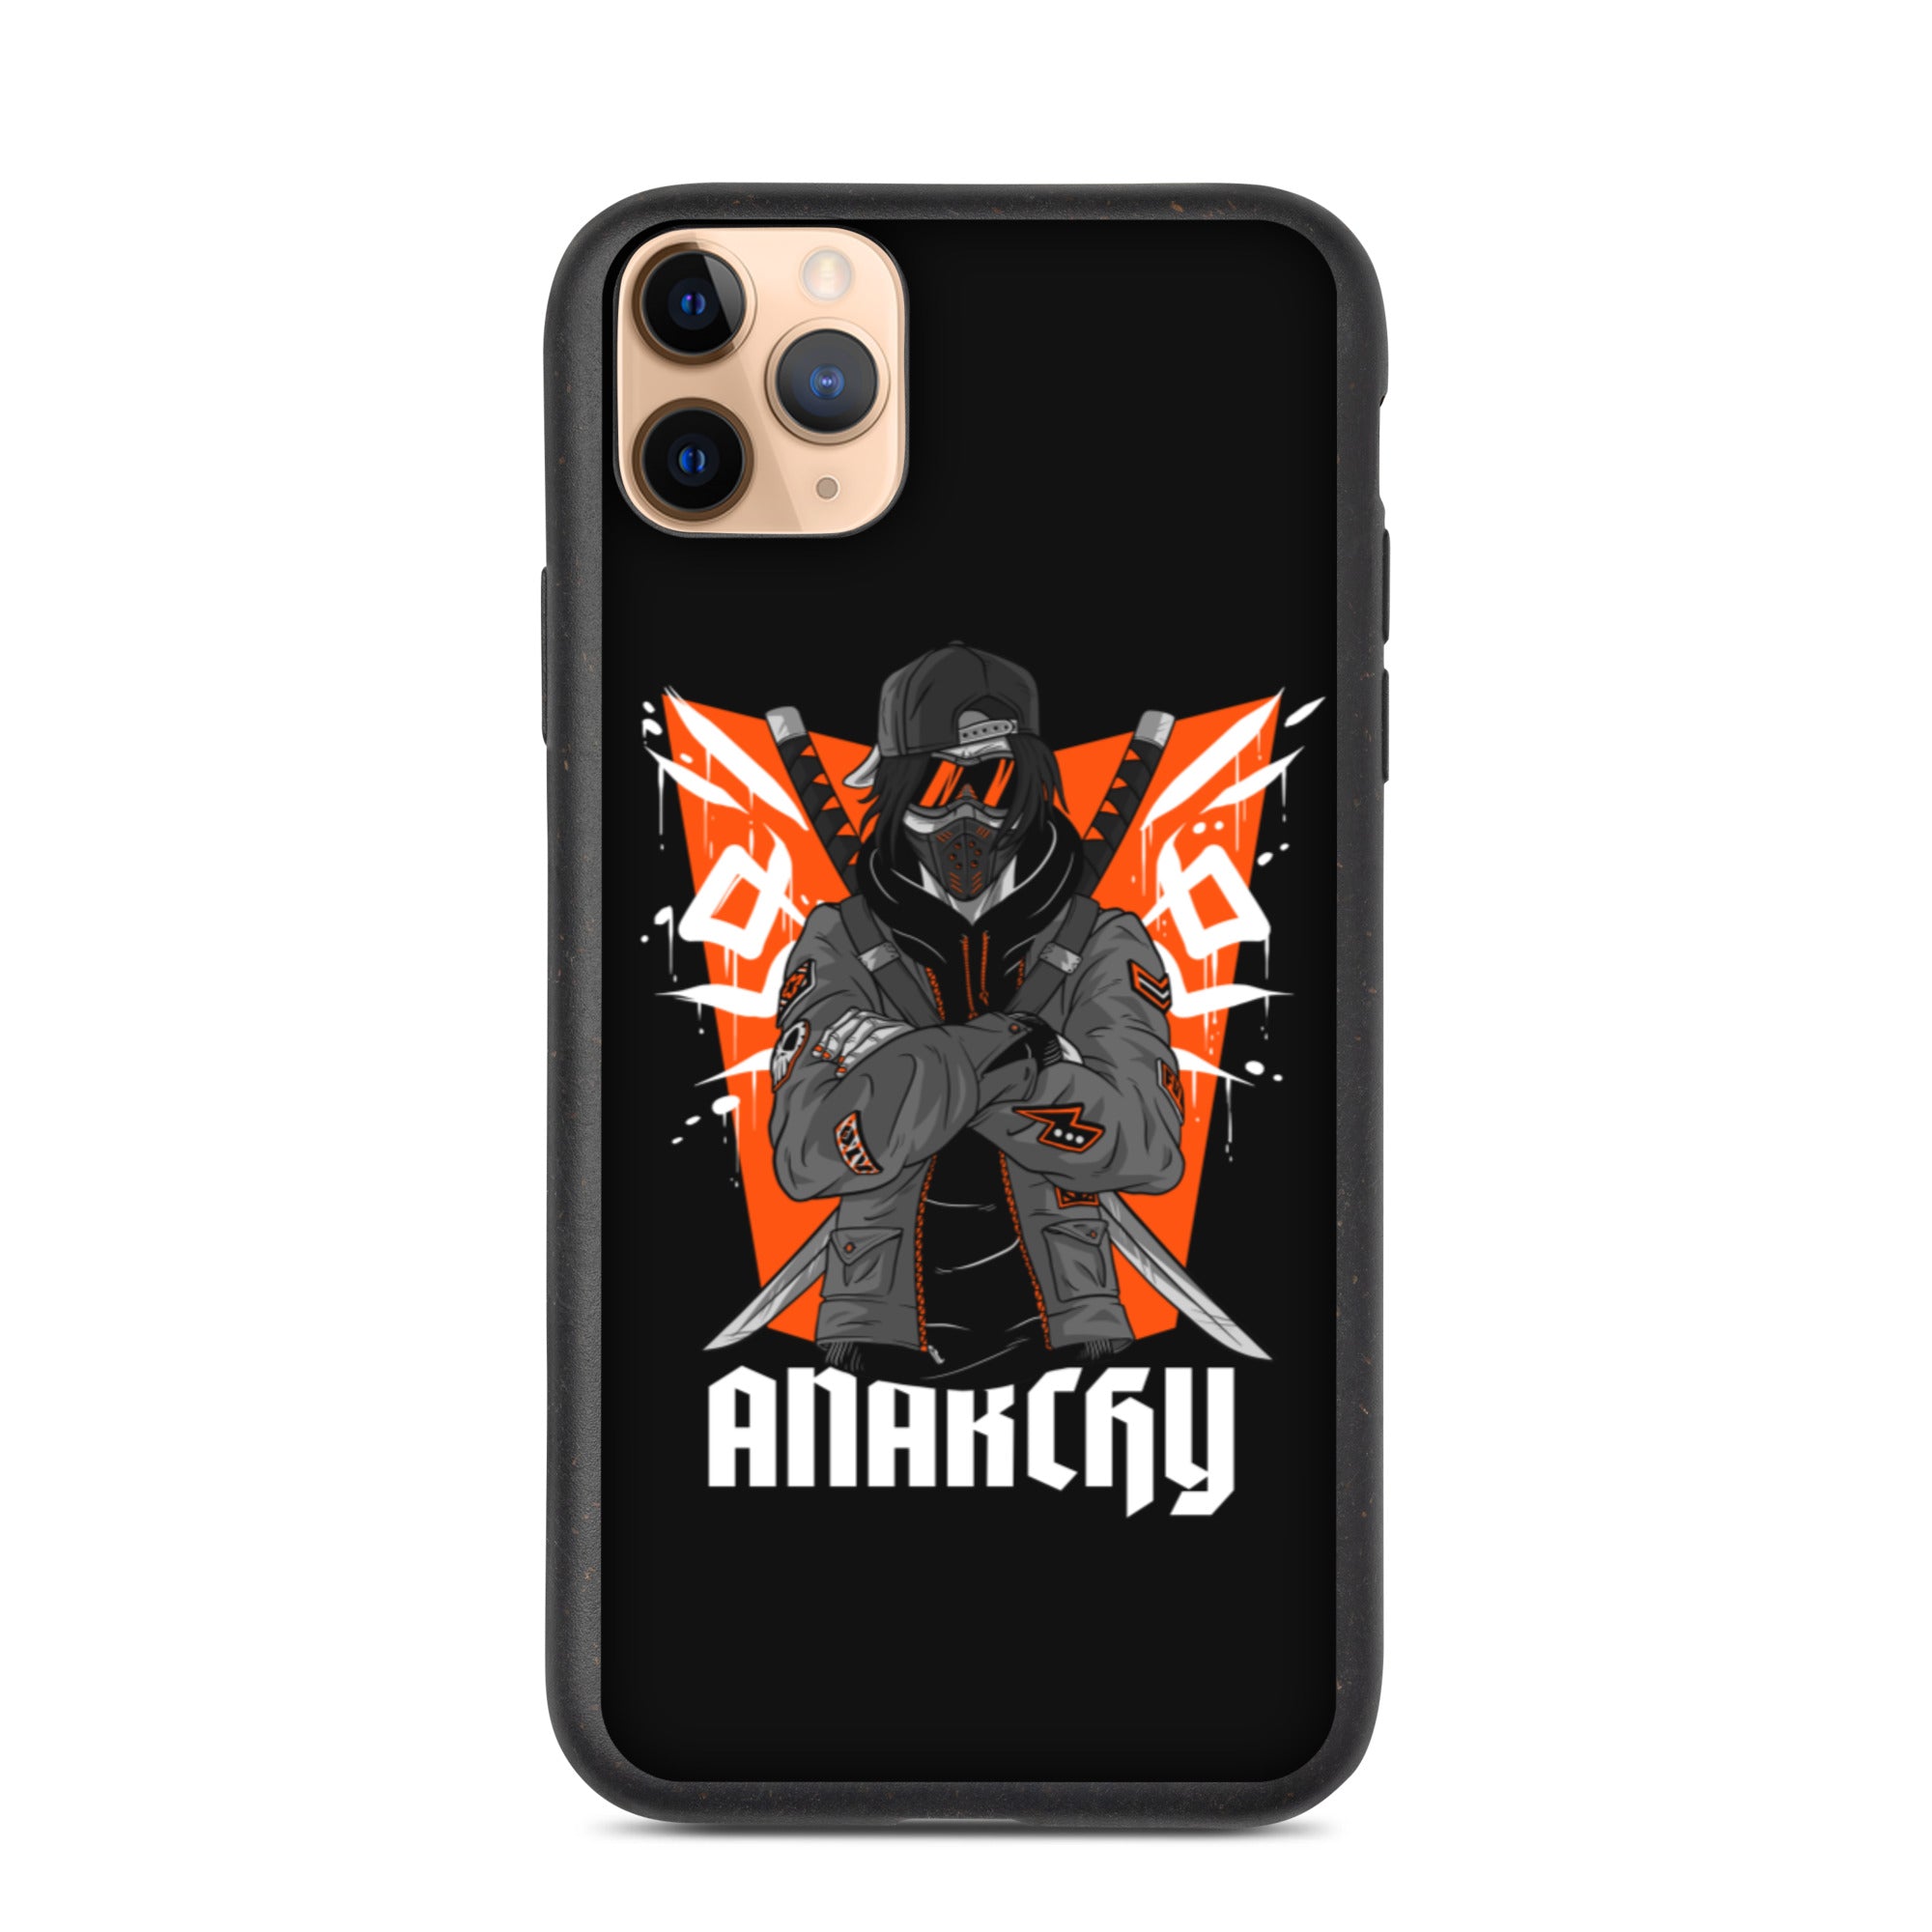 Mysterious Warrior Themed iPhone Cases